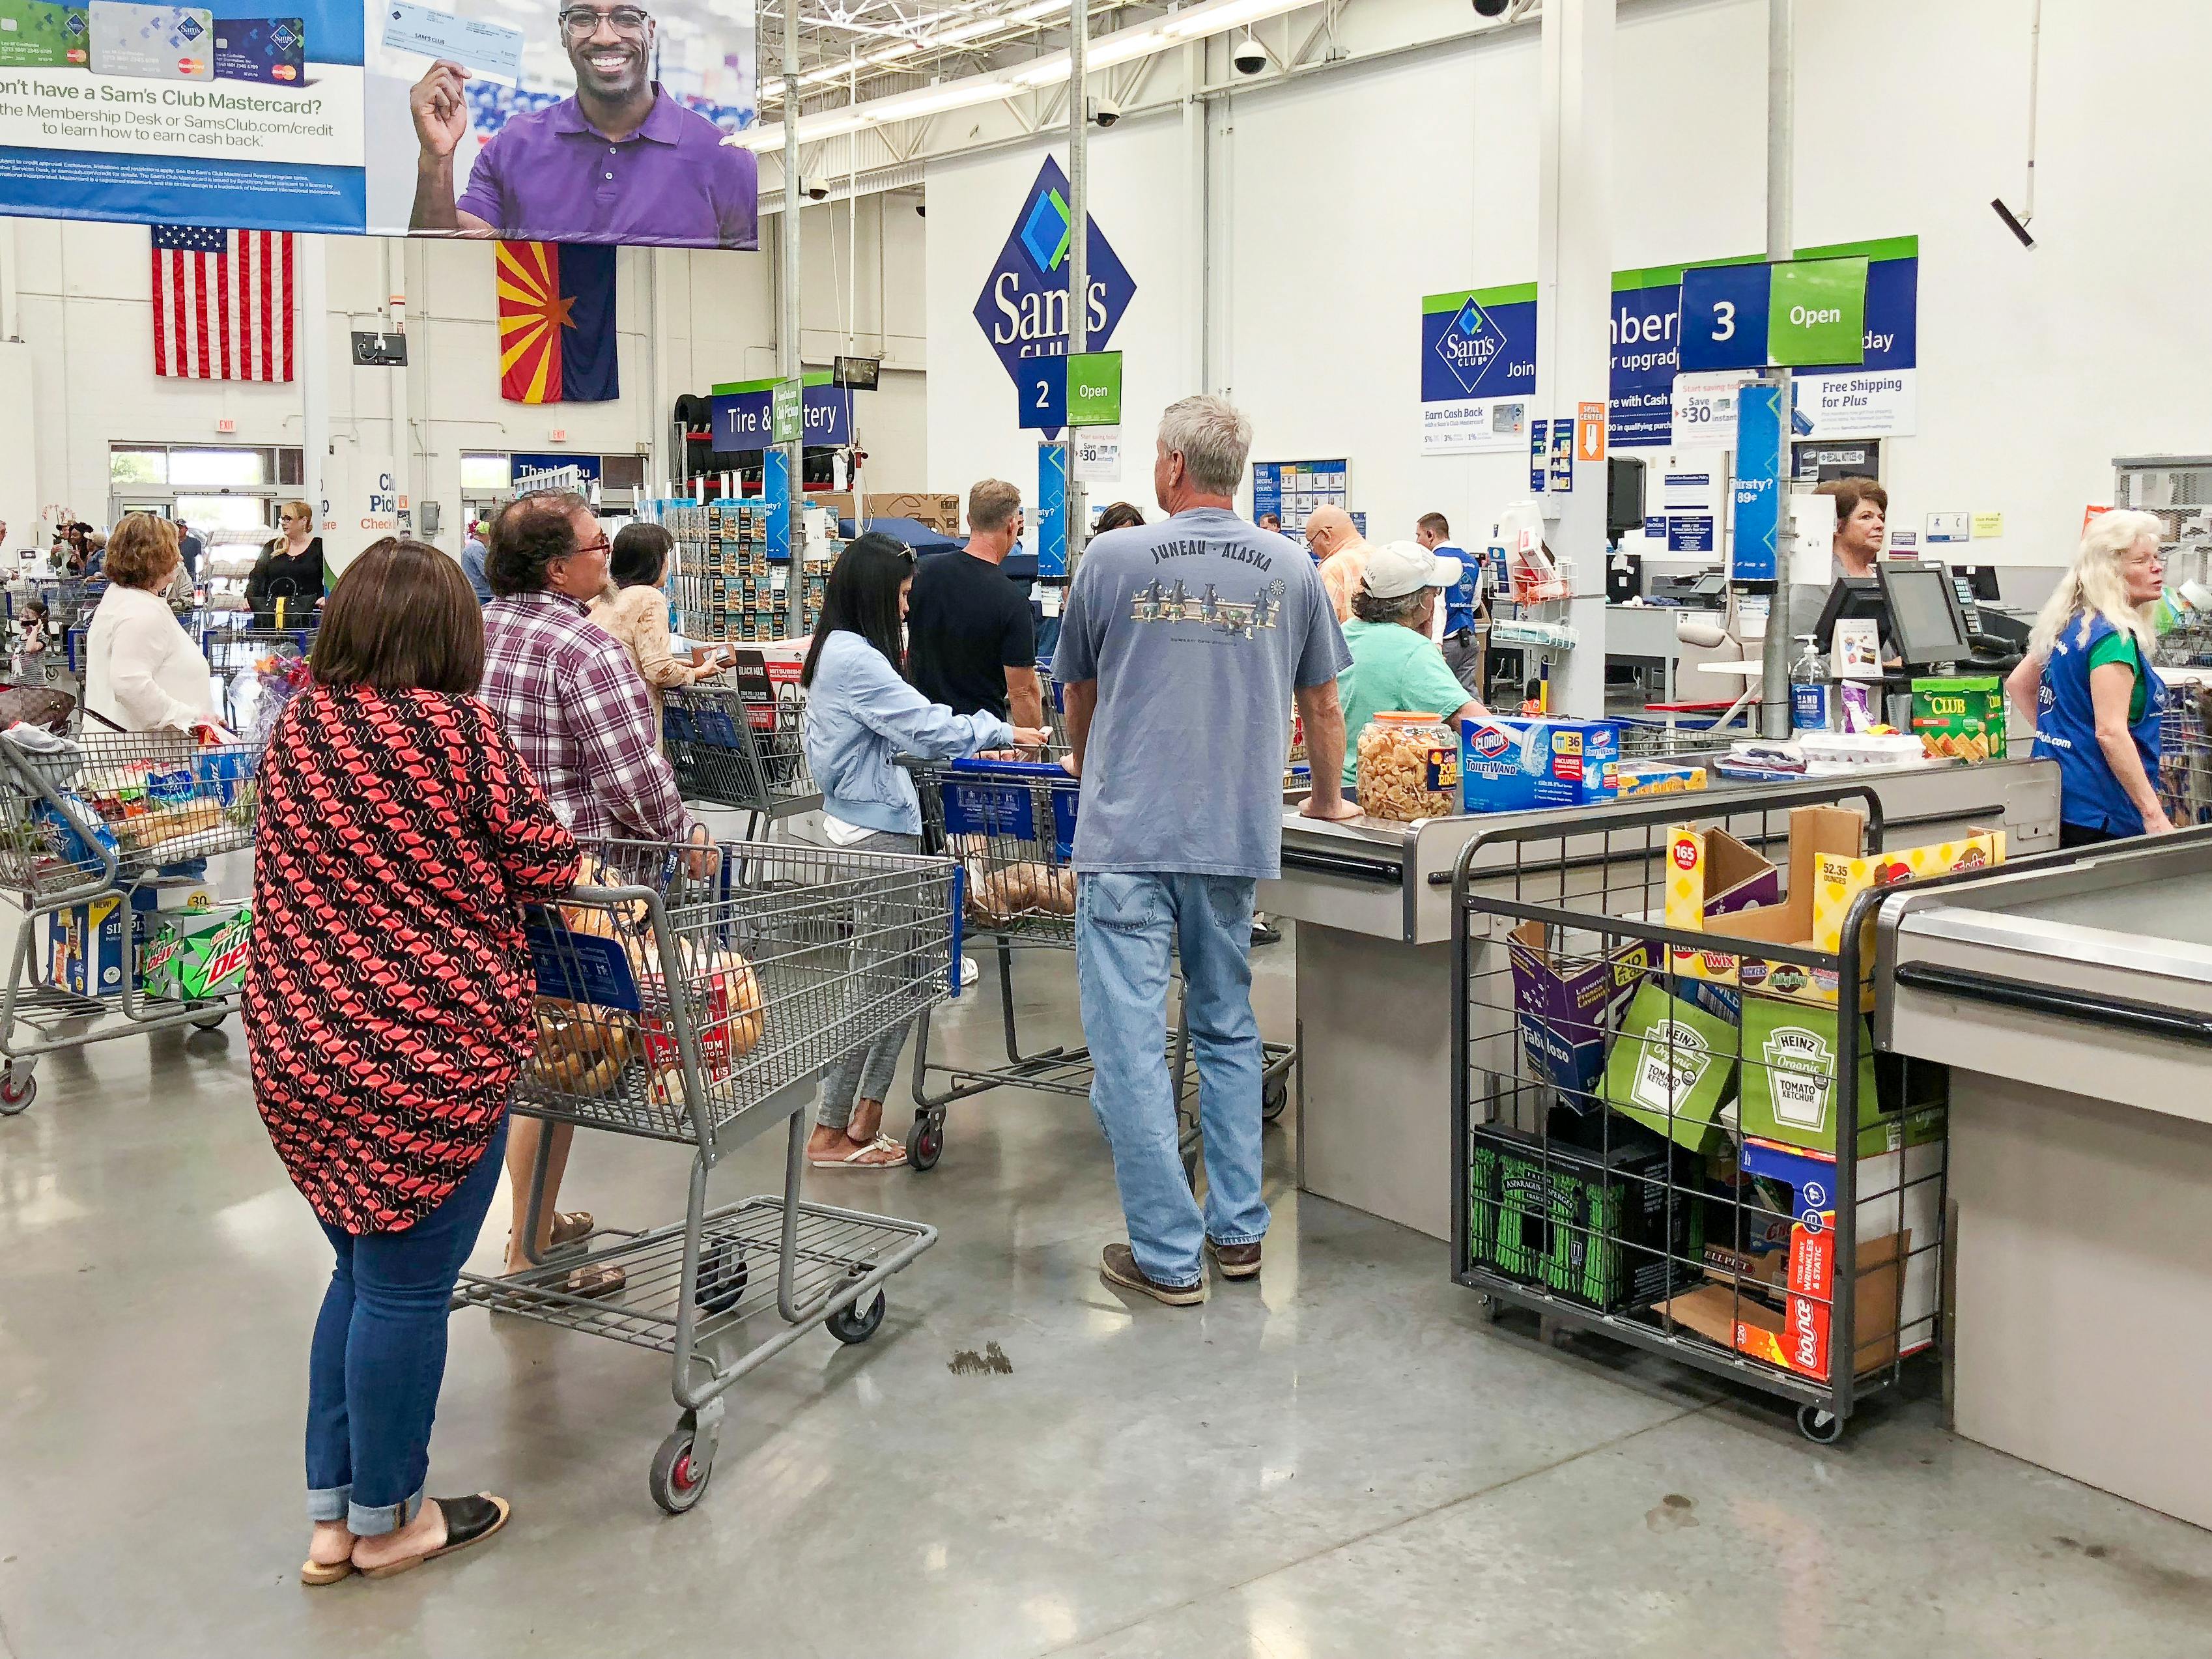 32 Tips For How To Shop at Sam's Club - The Krazy Coupon Lady